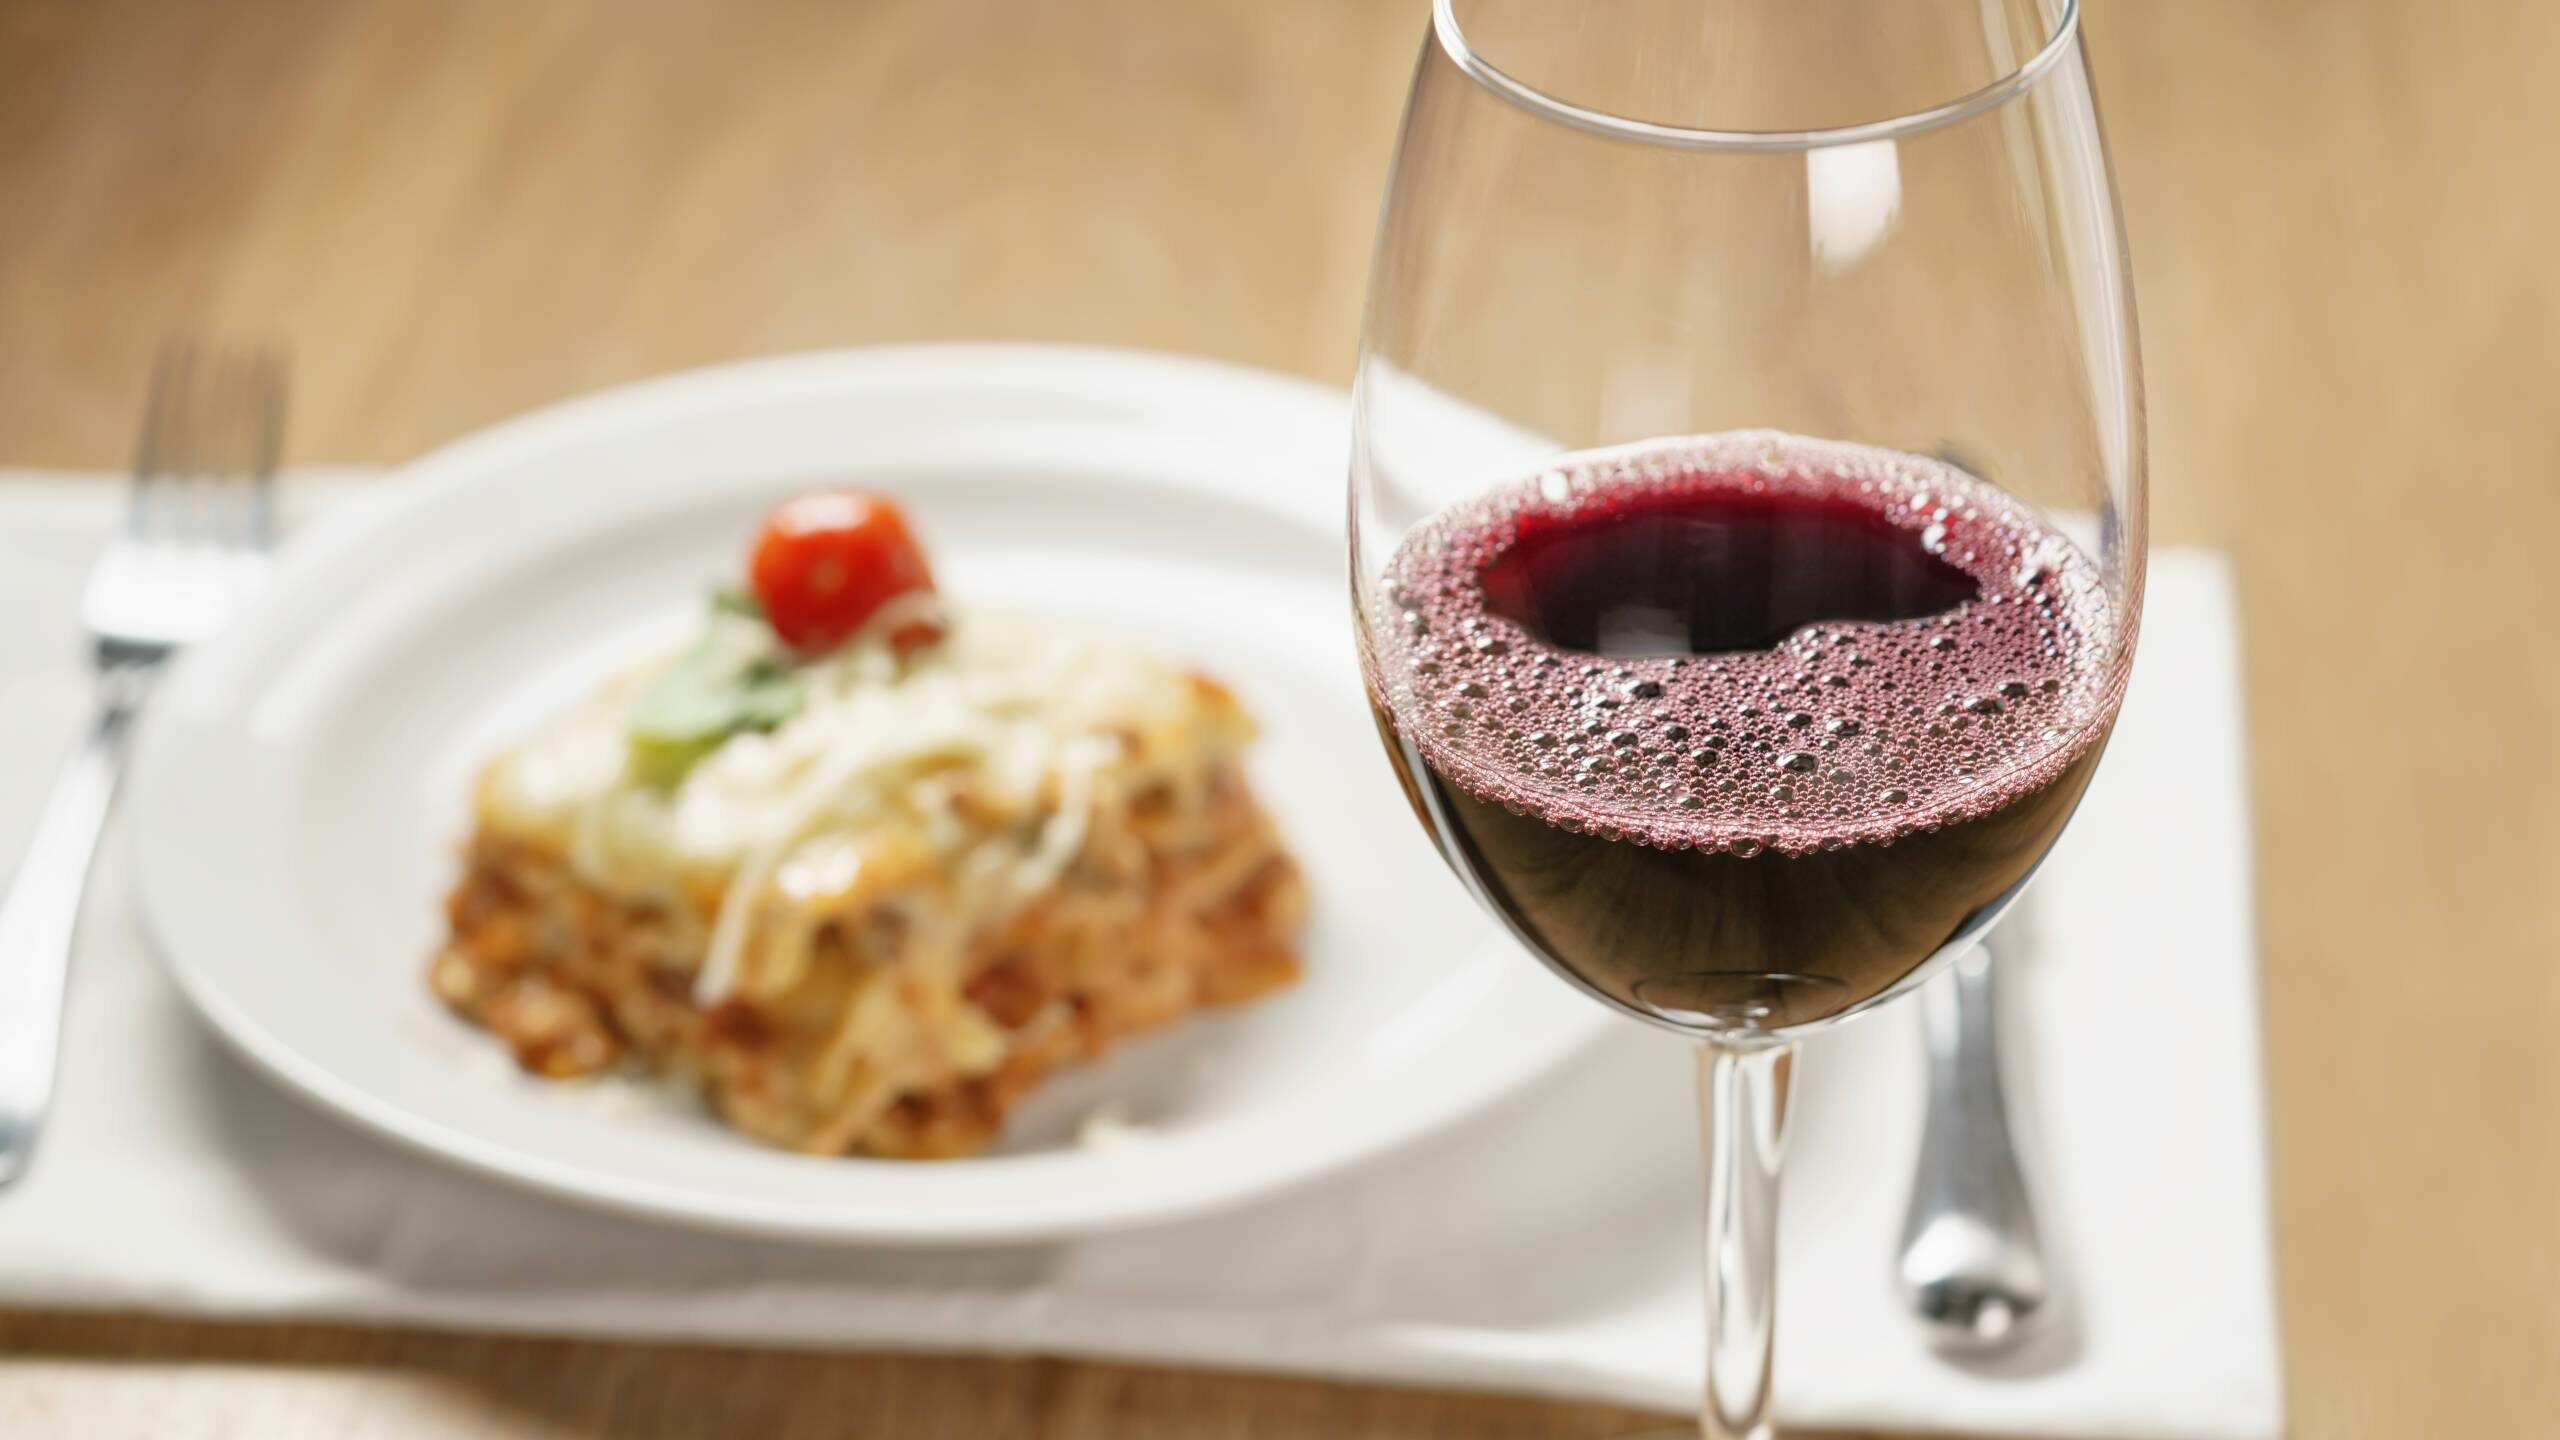 homemade lasagna with red wine on wood table